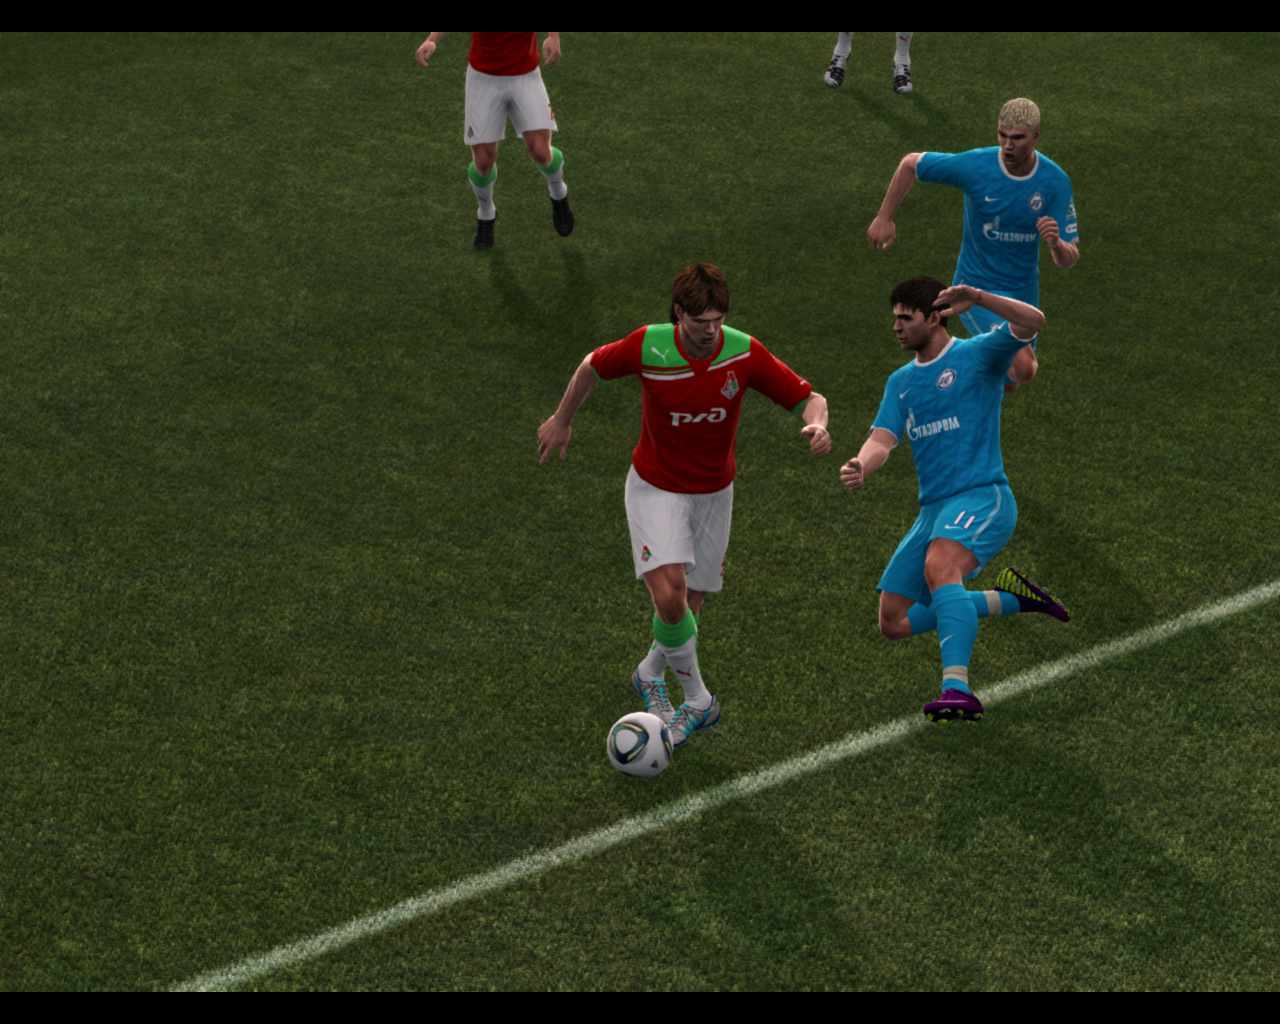 Pes 2008 download utorrent latest anchors a weigh 1945 torrent